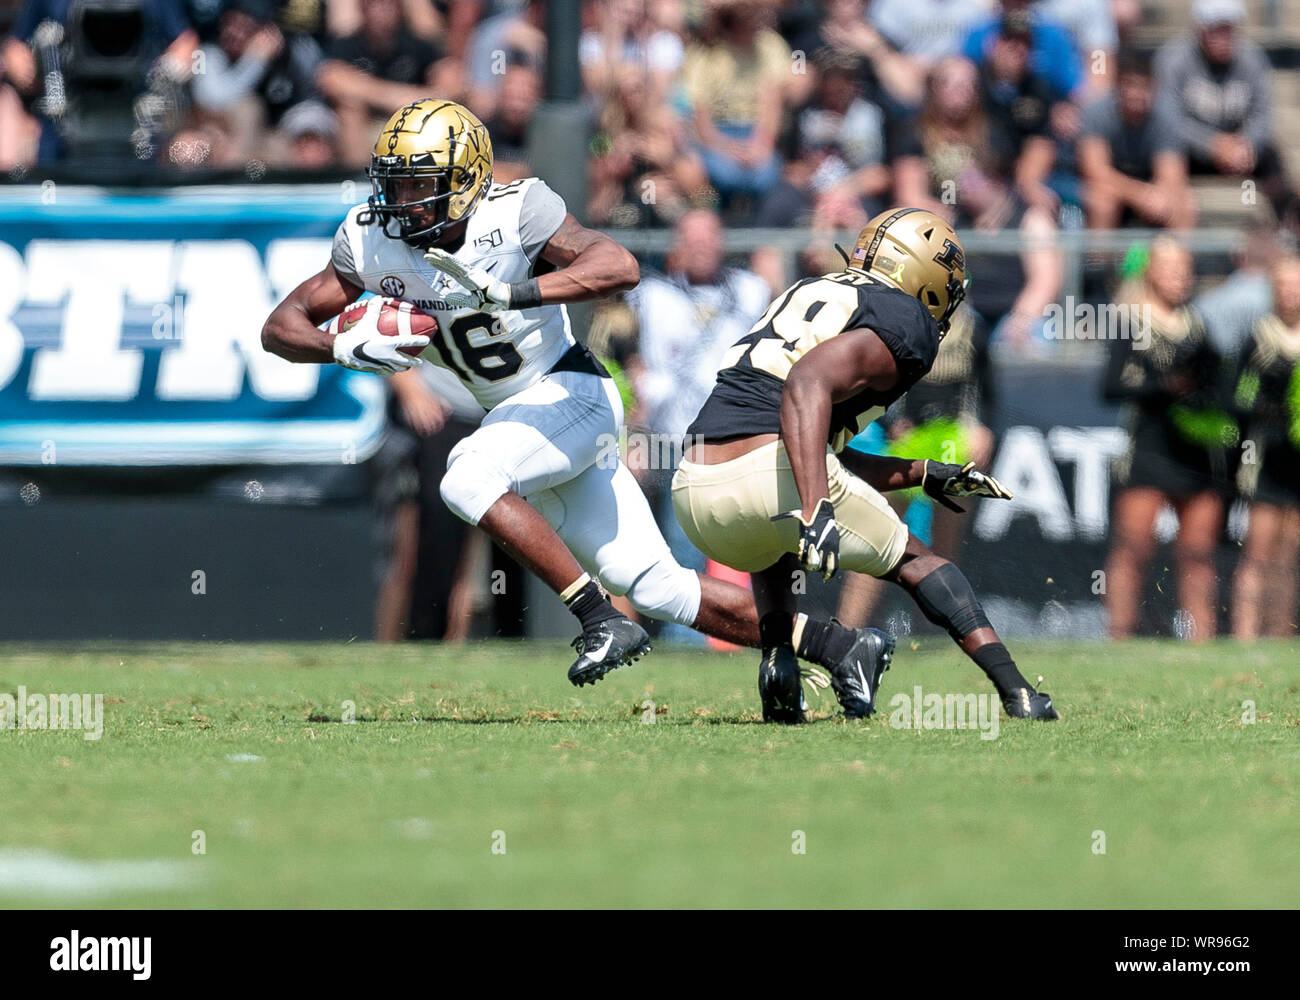 West Lafayette, Indiana, USA. 07th Sep, 2019. Vanderbilt wide receiver Kalija Lipscomb (16) runs with the ball as Purdue defensive back Simeon Smiley (29) pursues during NCAA football game action between the Vanderbilt Commodores and the Purdue Boilermakers at Ross-Ade Stadium in West Lafayette, Indiana. Purdue defeated Vanderbilt 42-24. John Mersits/CSM/Alamy Live News Stock Photo